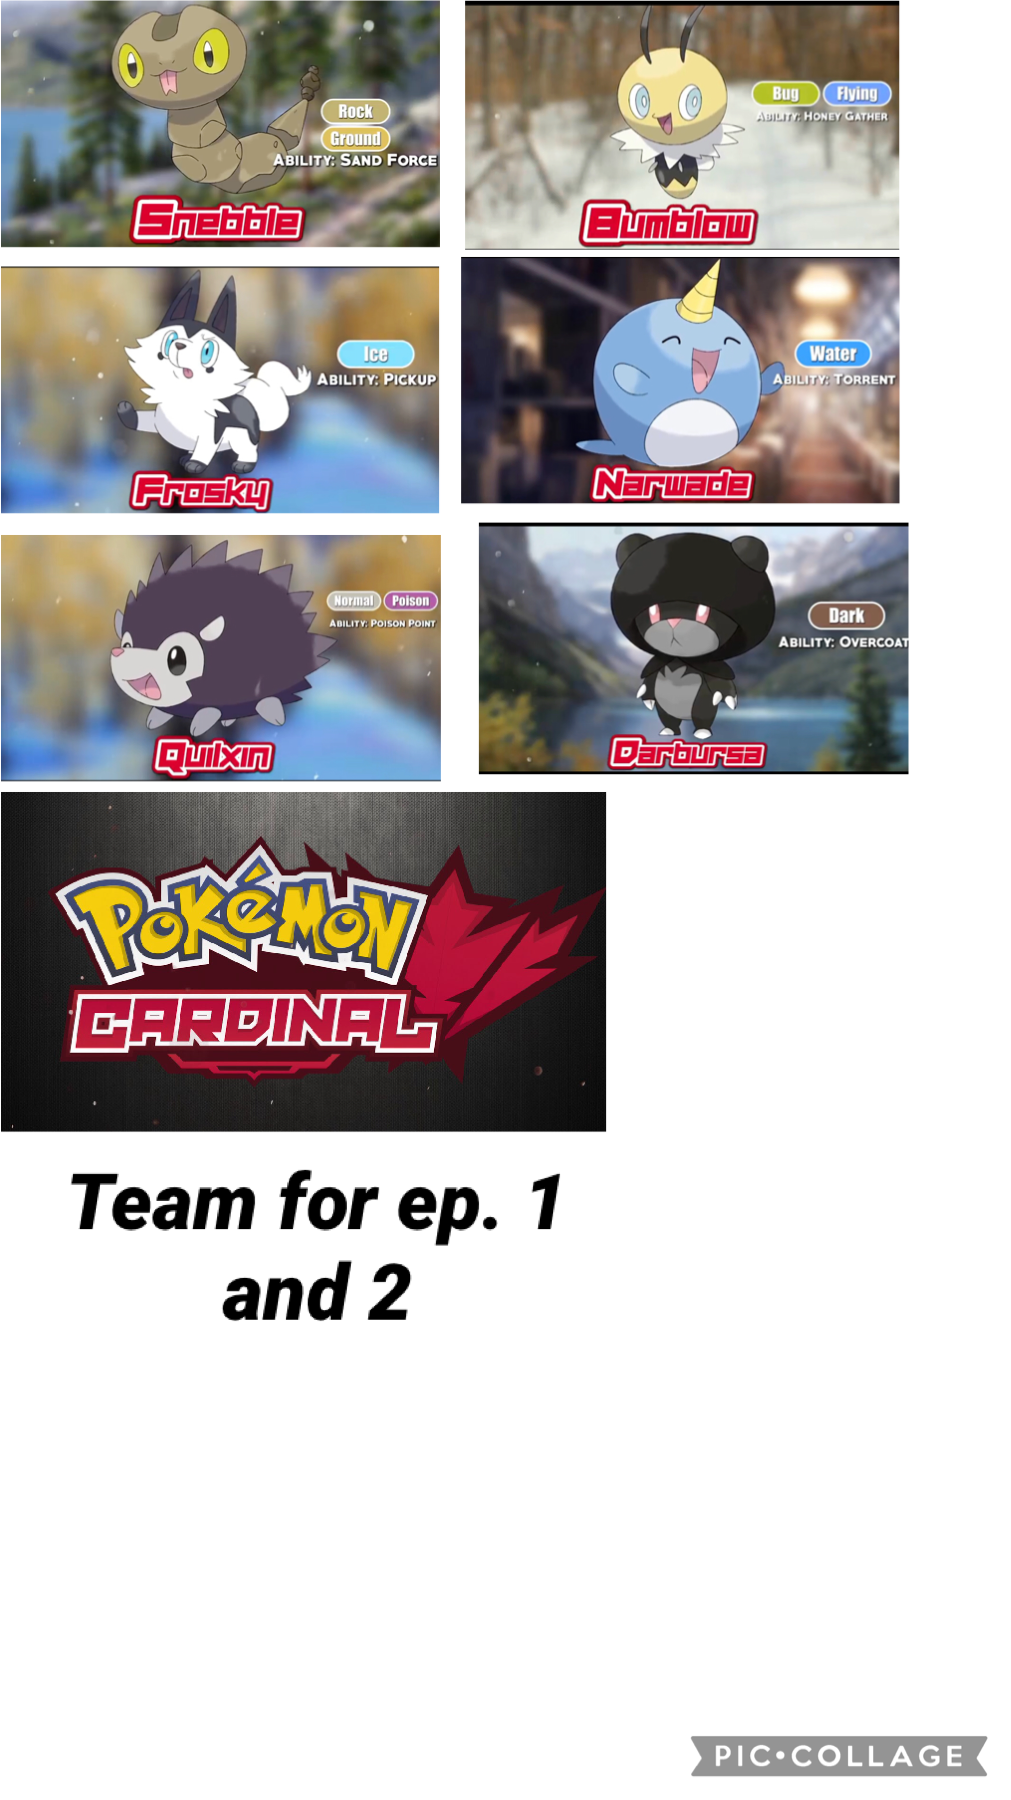 My team for Pokémon cardinal episodes 1 and 2